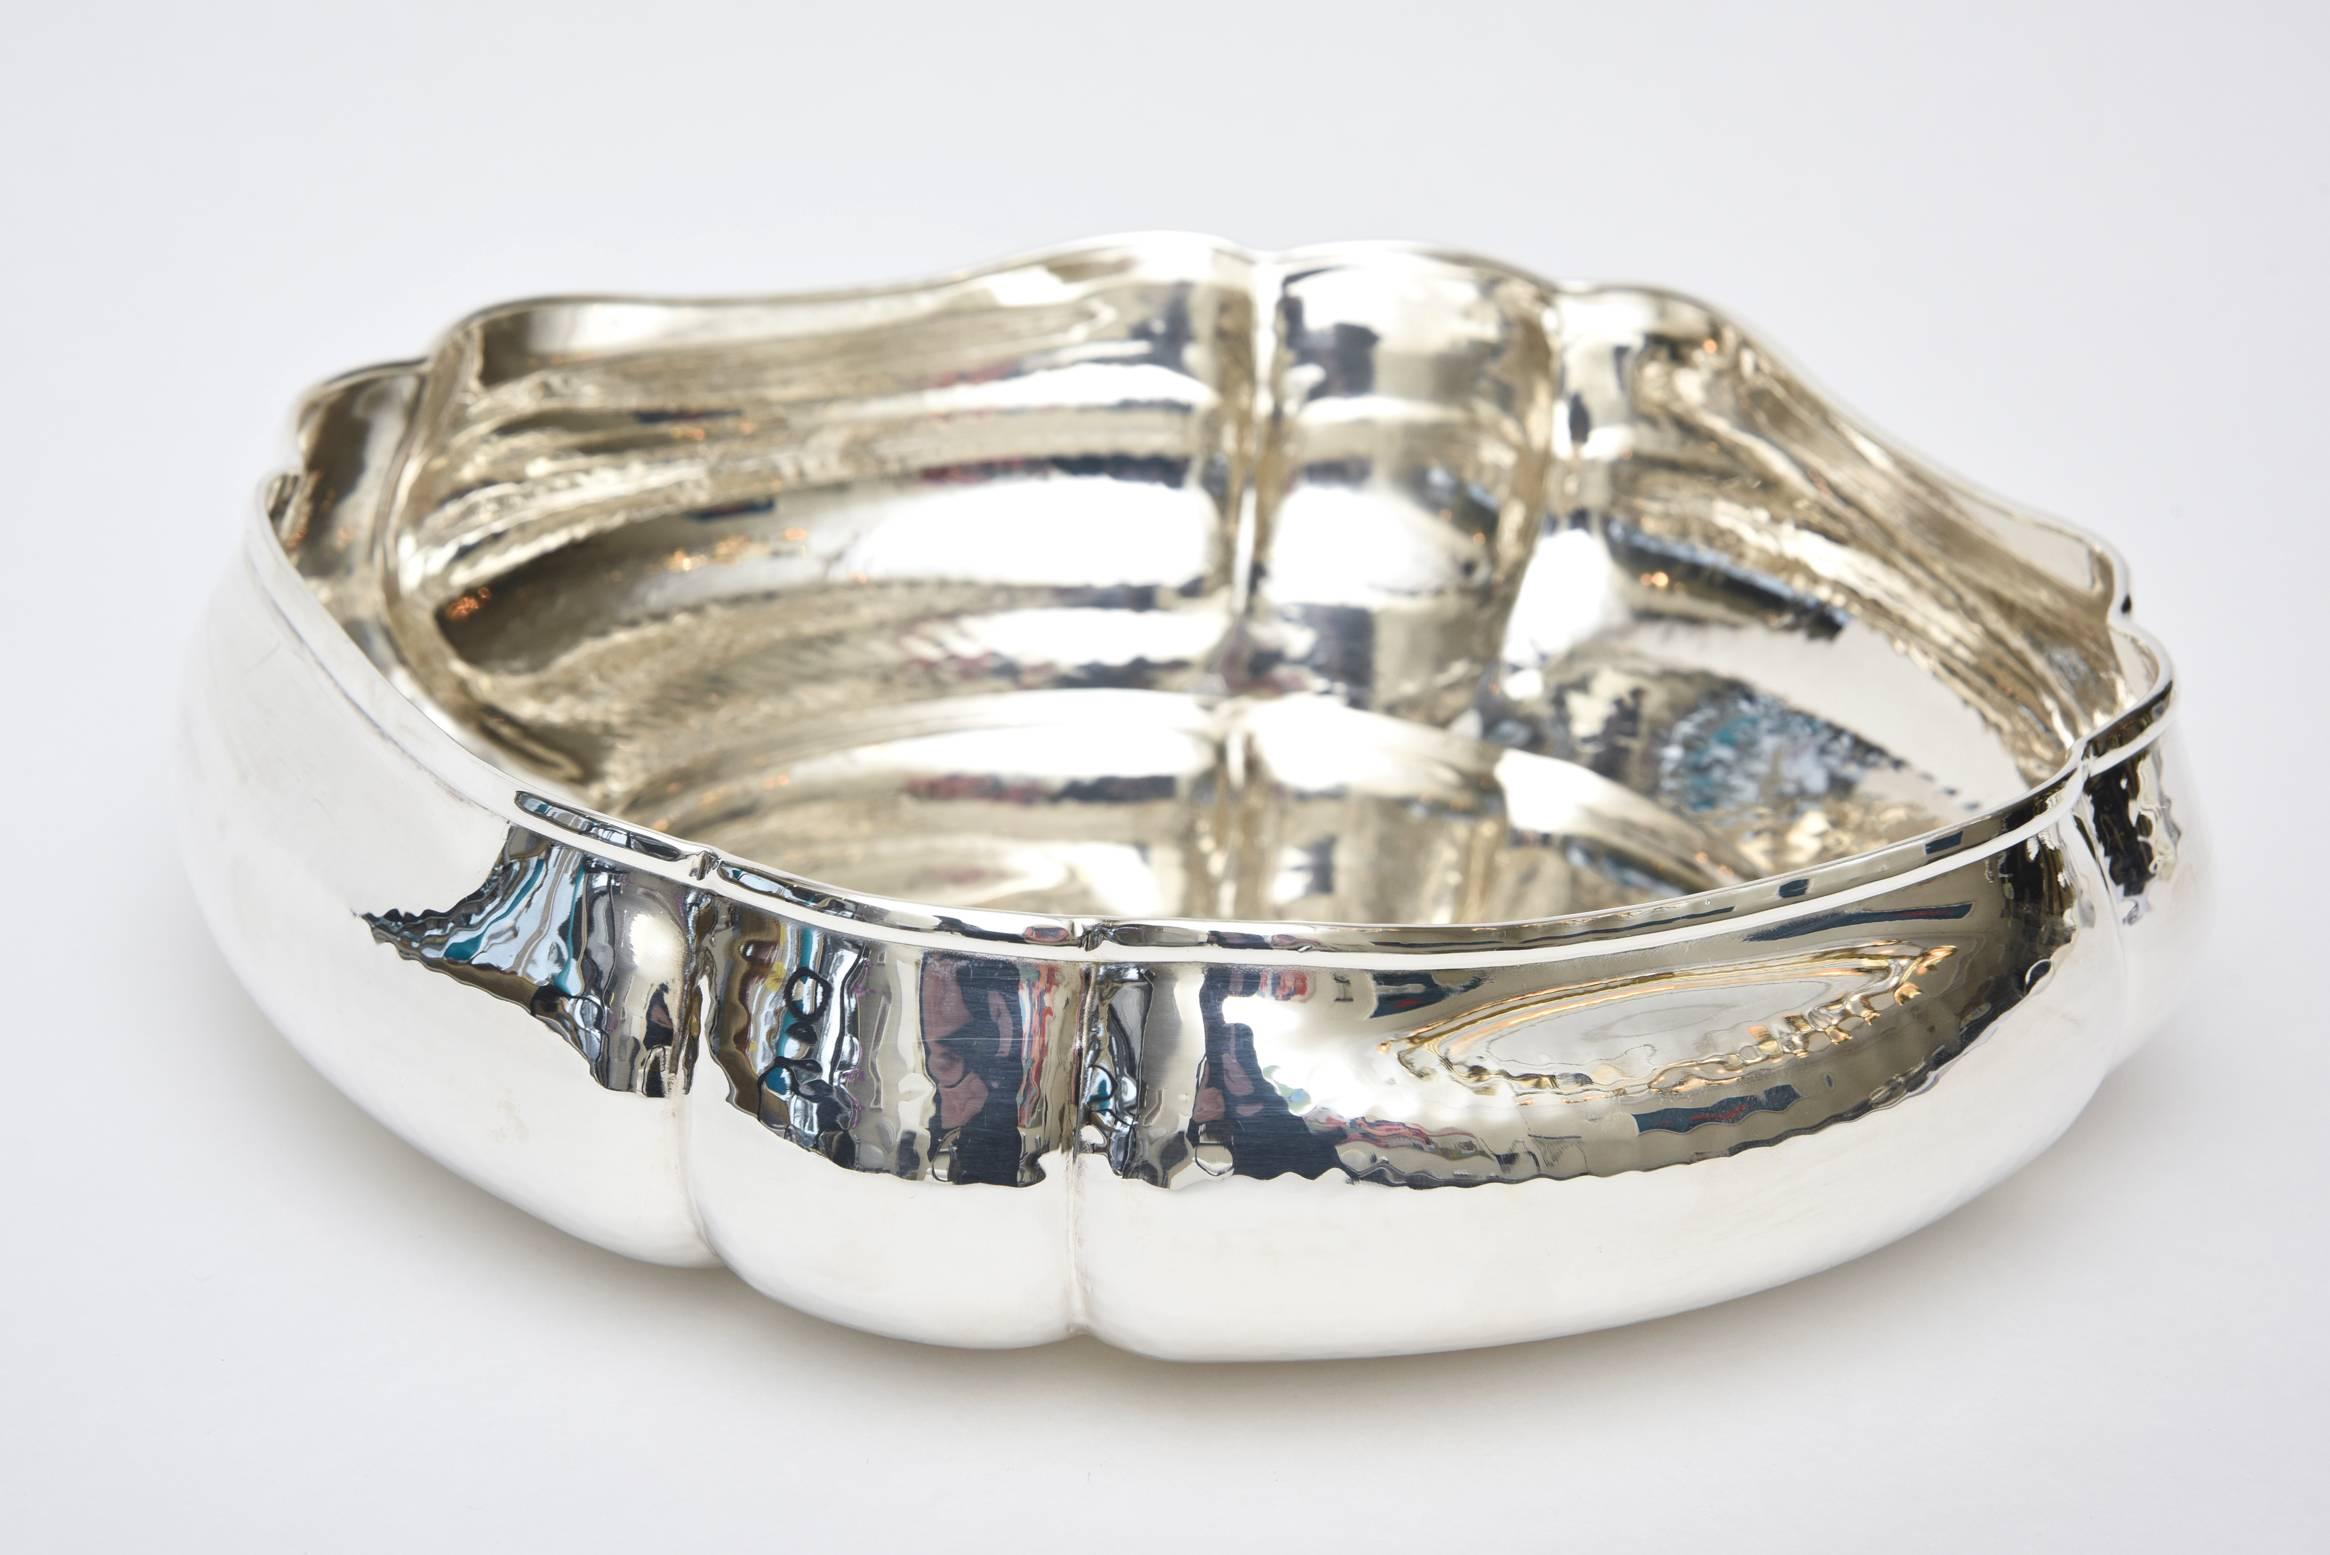 This lovely vintage hand-hammered silver plate Italian bowl is hallmarked on the bottom: Battuto a Mano-silver plated. It is perfect for so many uses and occasions and for serving. It is a great size. It bridges the gap of traditional versus modern.